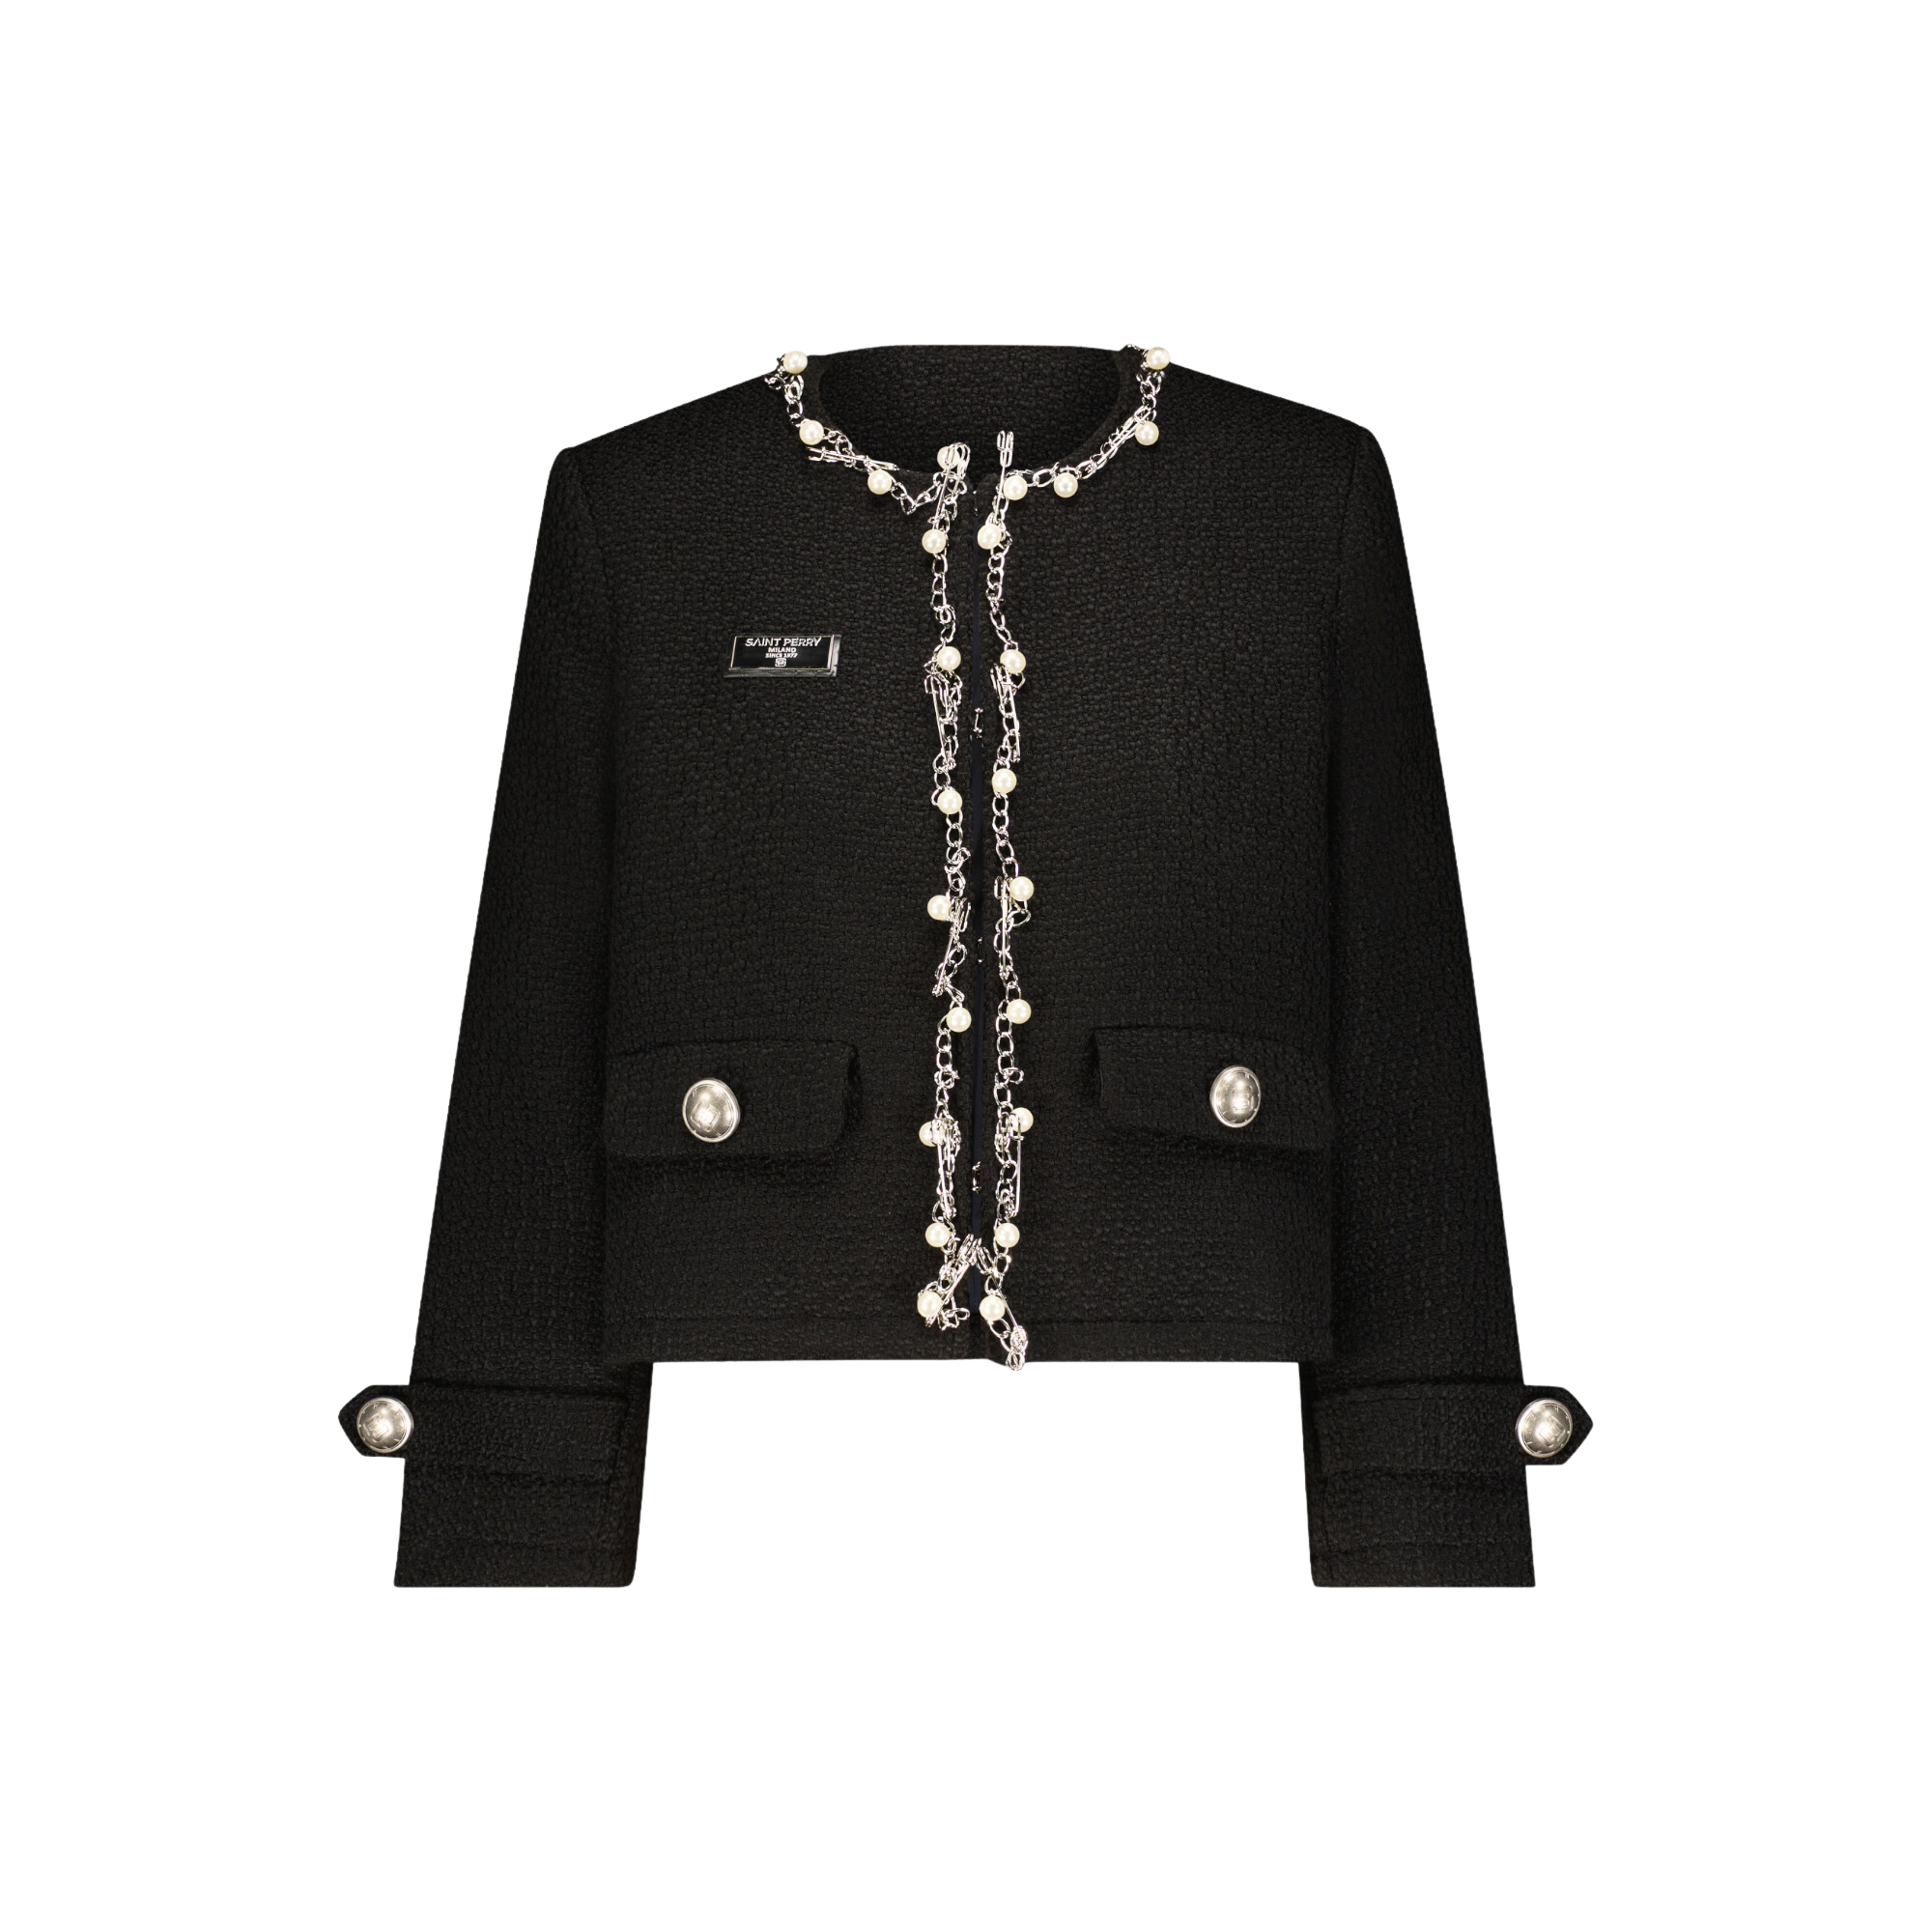 Stud and Pearls Women's Jacket